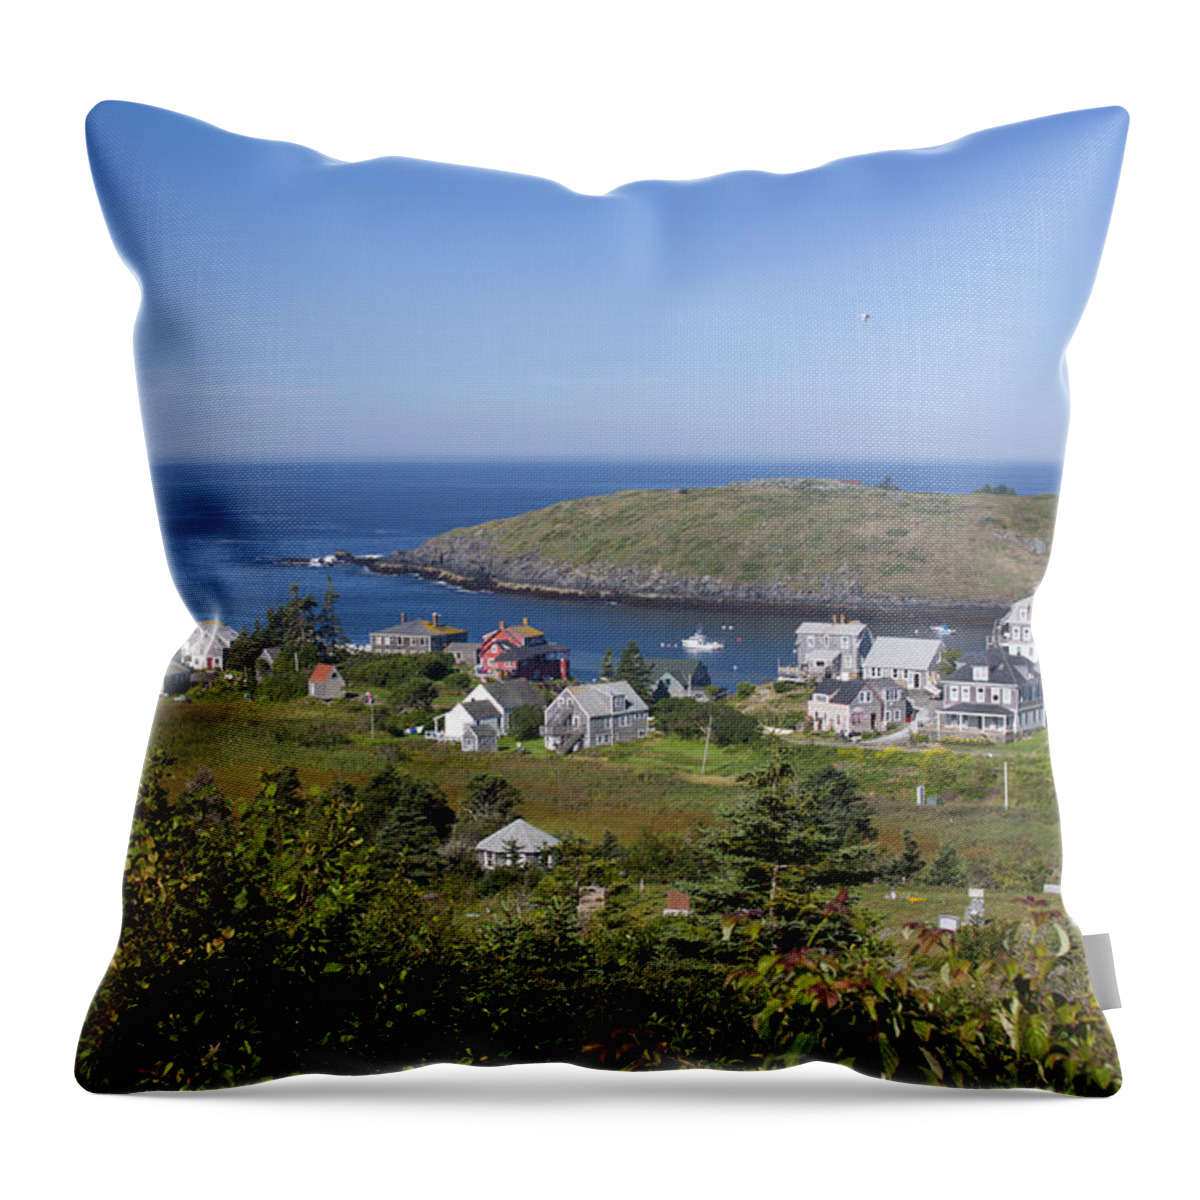 Port Throw Pillow featuring the photograph Looking To Port by Jean Macaluso